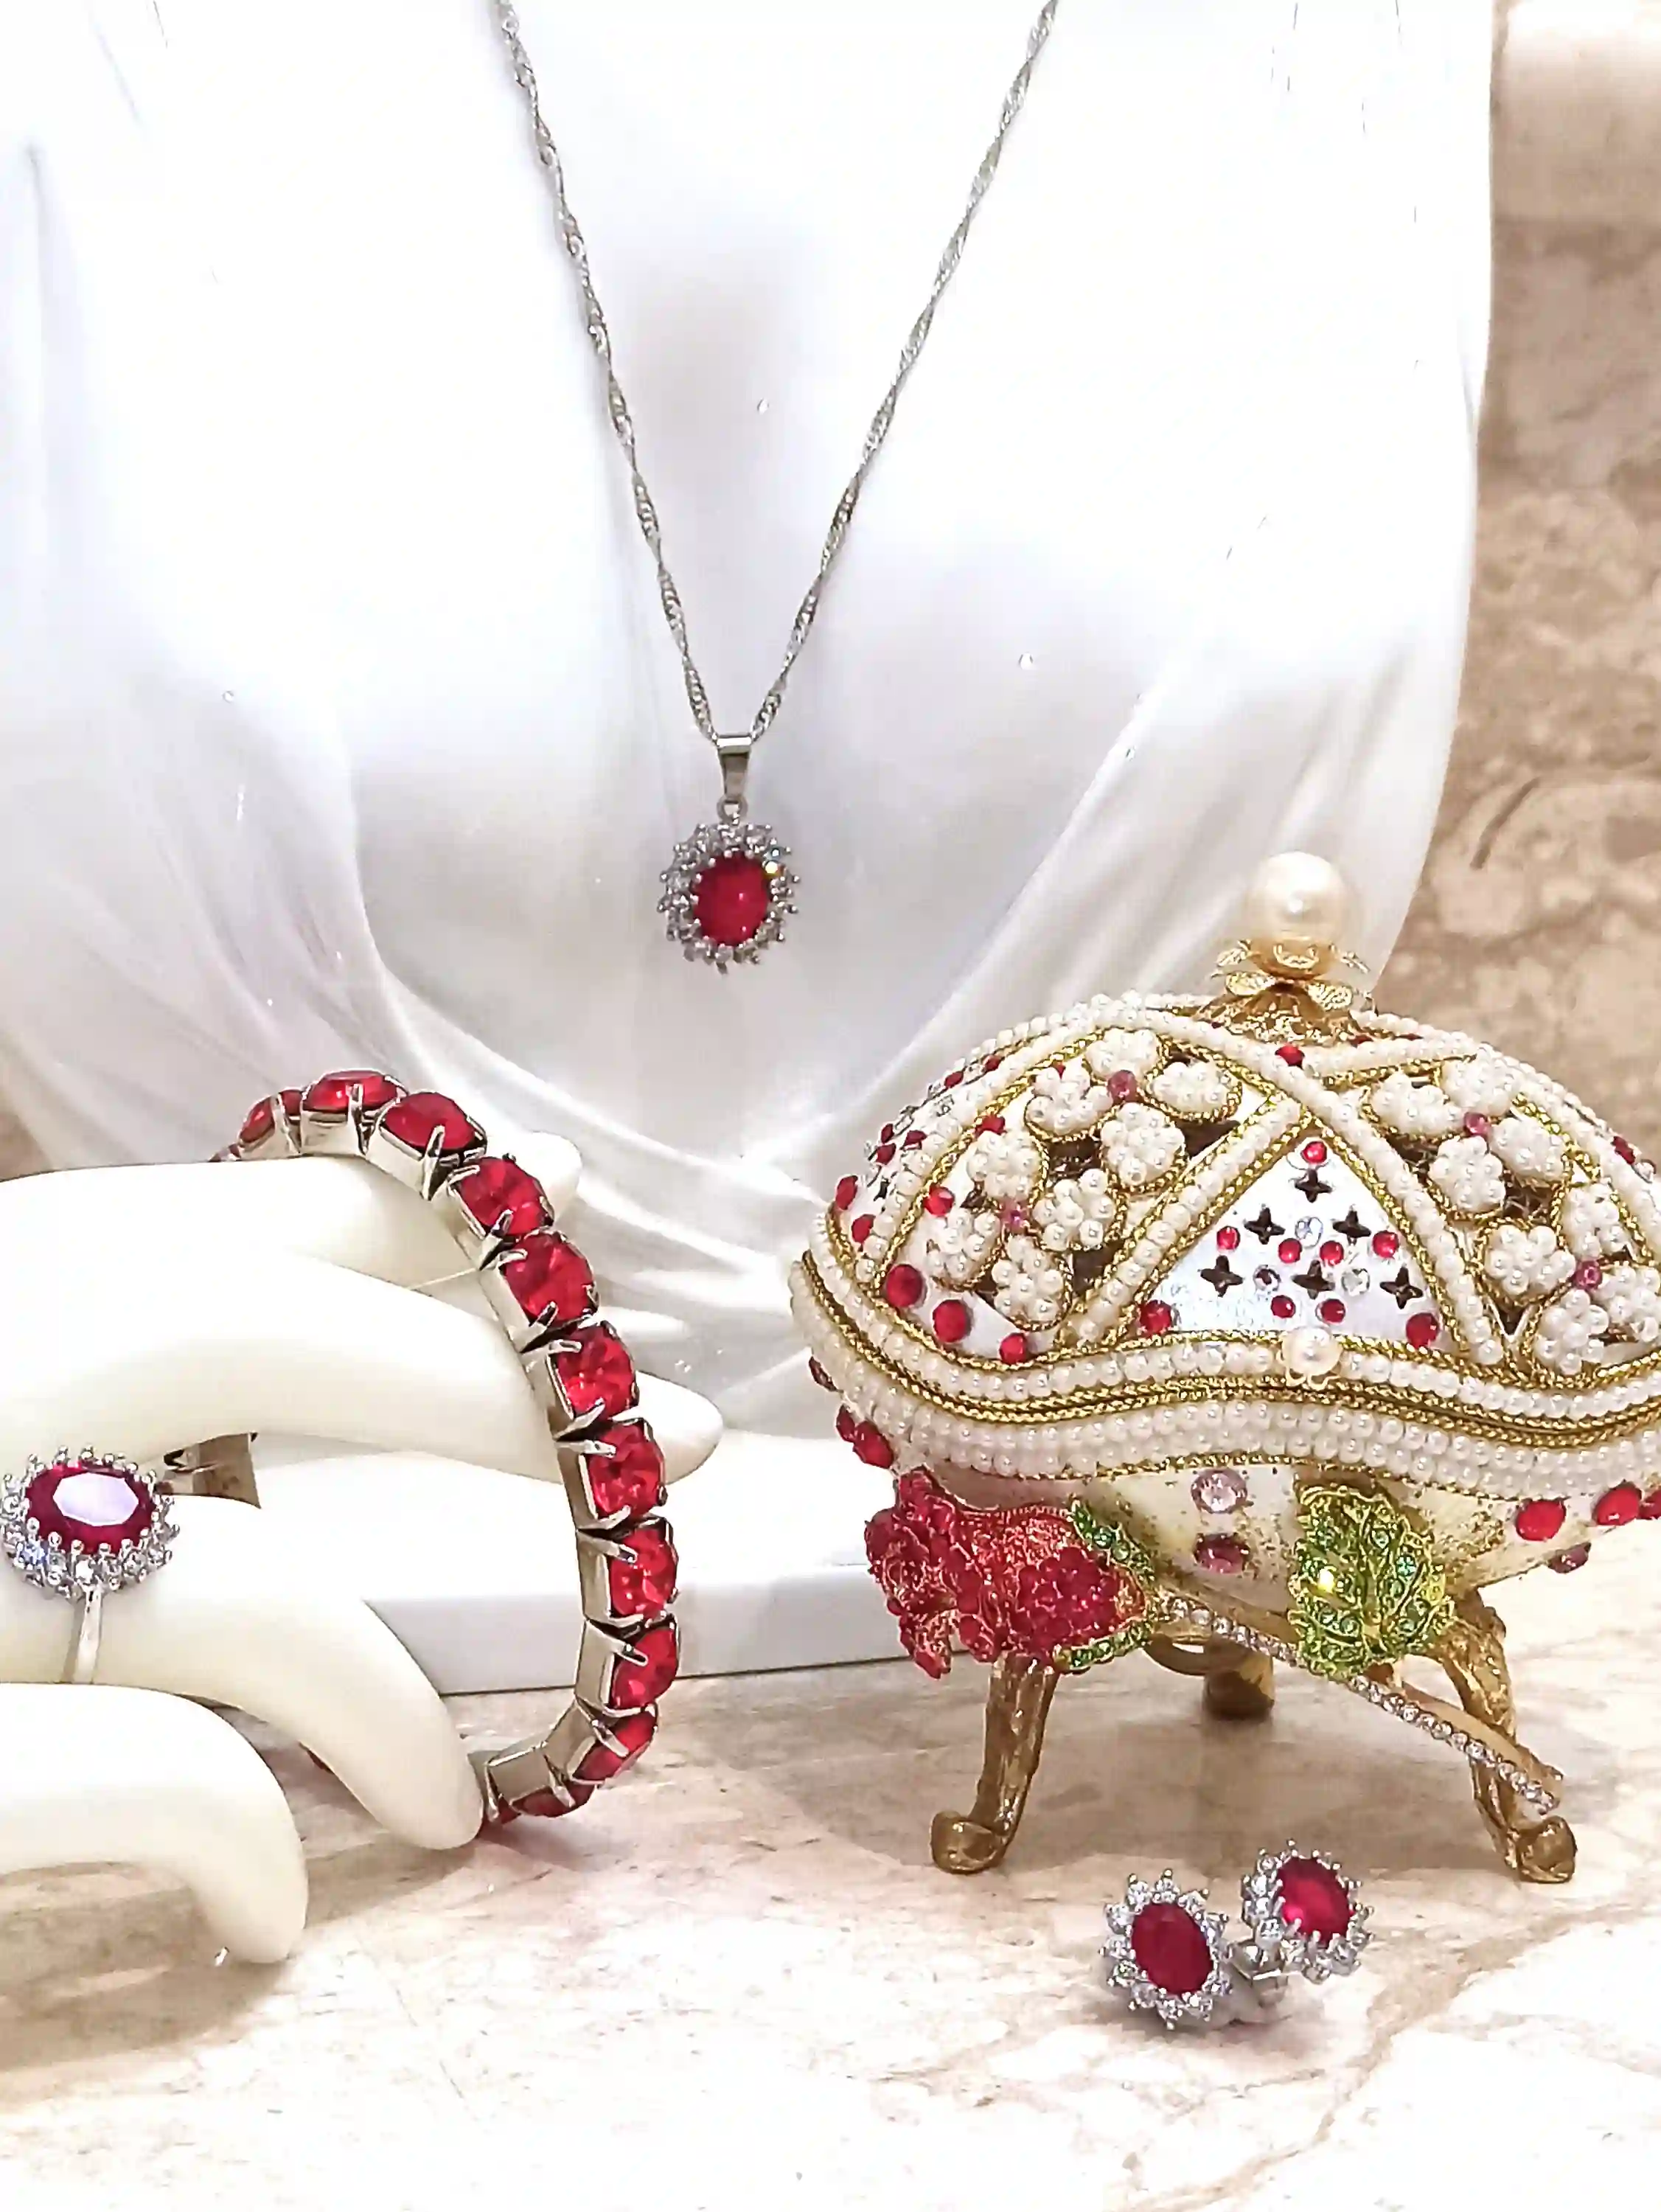 Faberge egg Christmas RUBY SET 24k Gold Faberge HANDCARVED Real Egg Musical Jewelry Box Vintage Gift, Ruby Necklace Earrings Ring Bracelet 